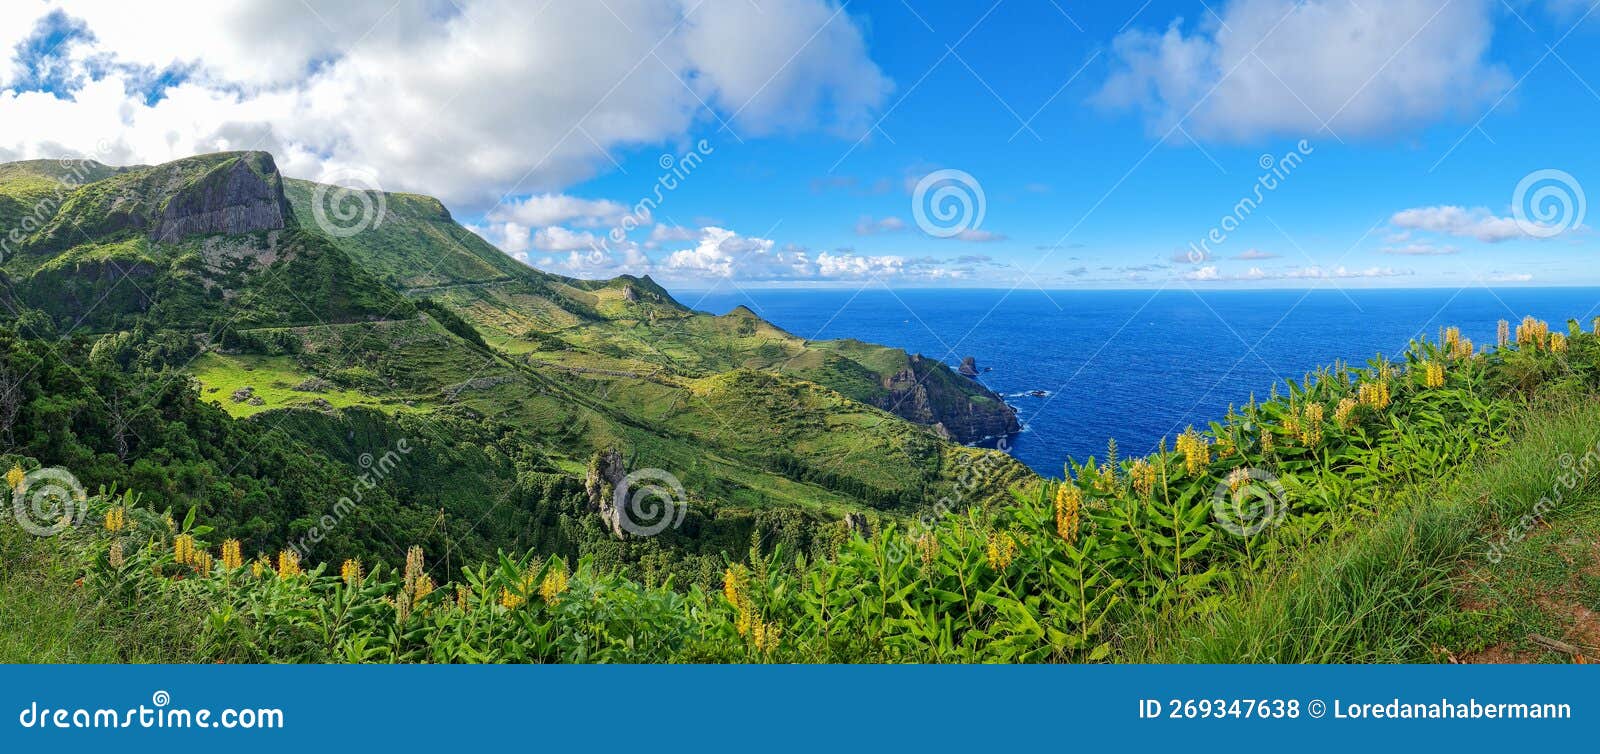 panoramaview of basalt cliffs of rocha dos bordoes on flores island, azores, portugal